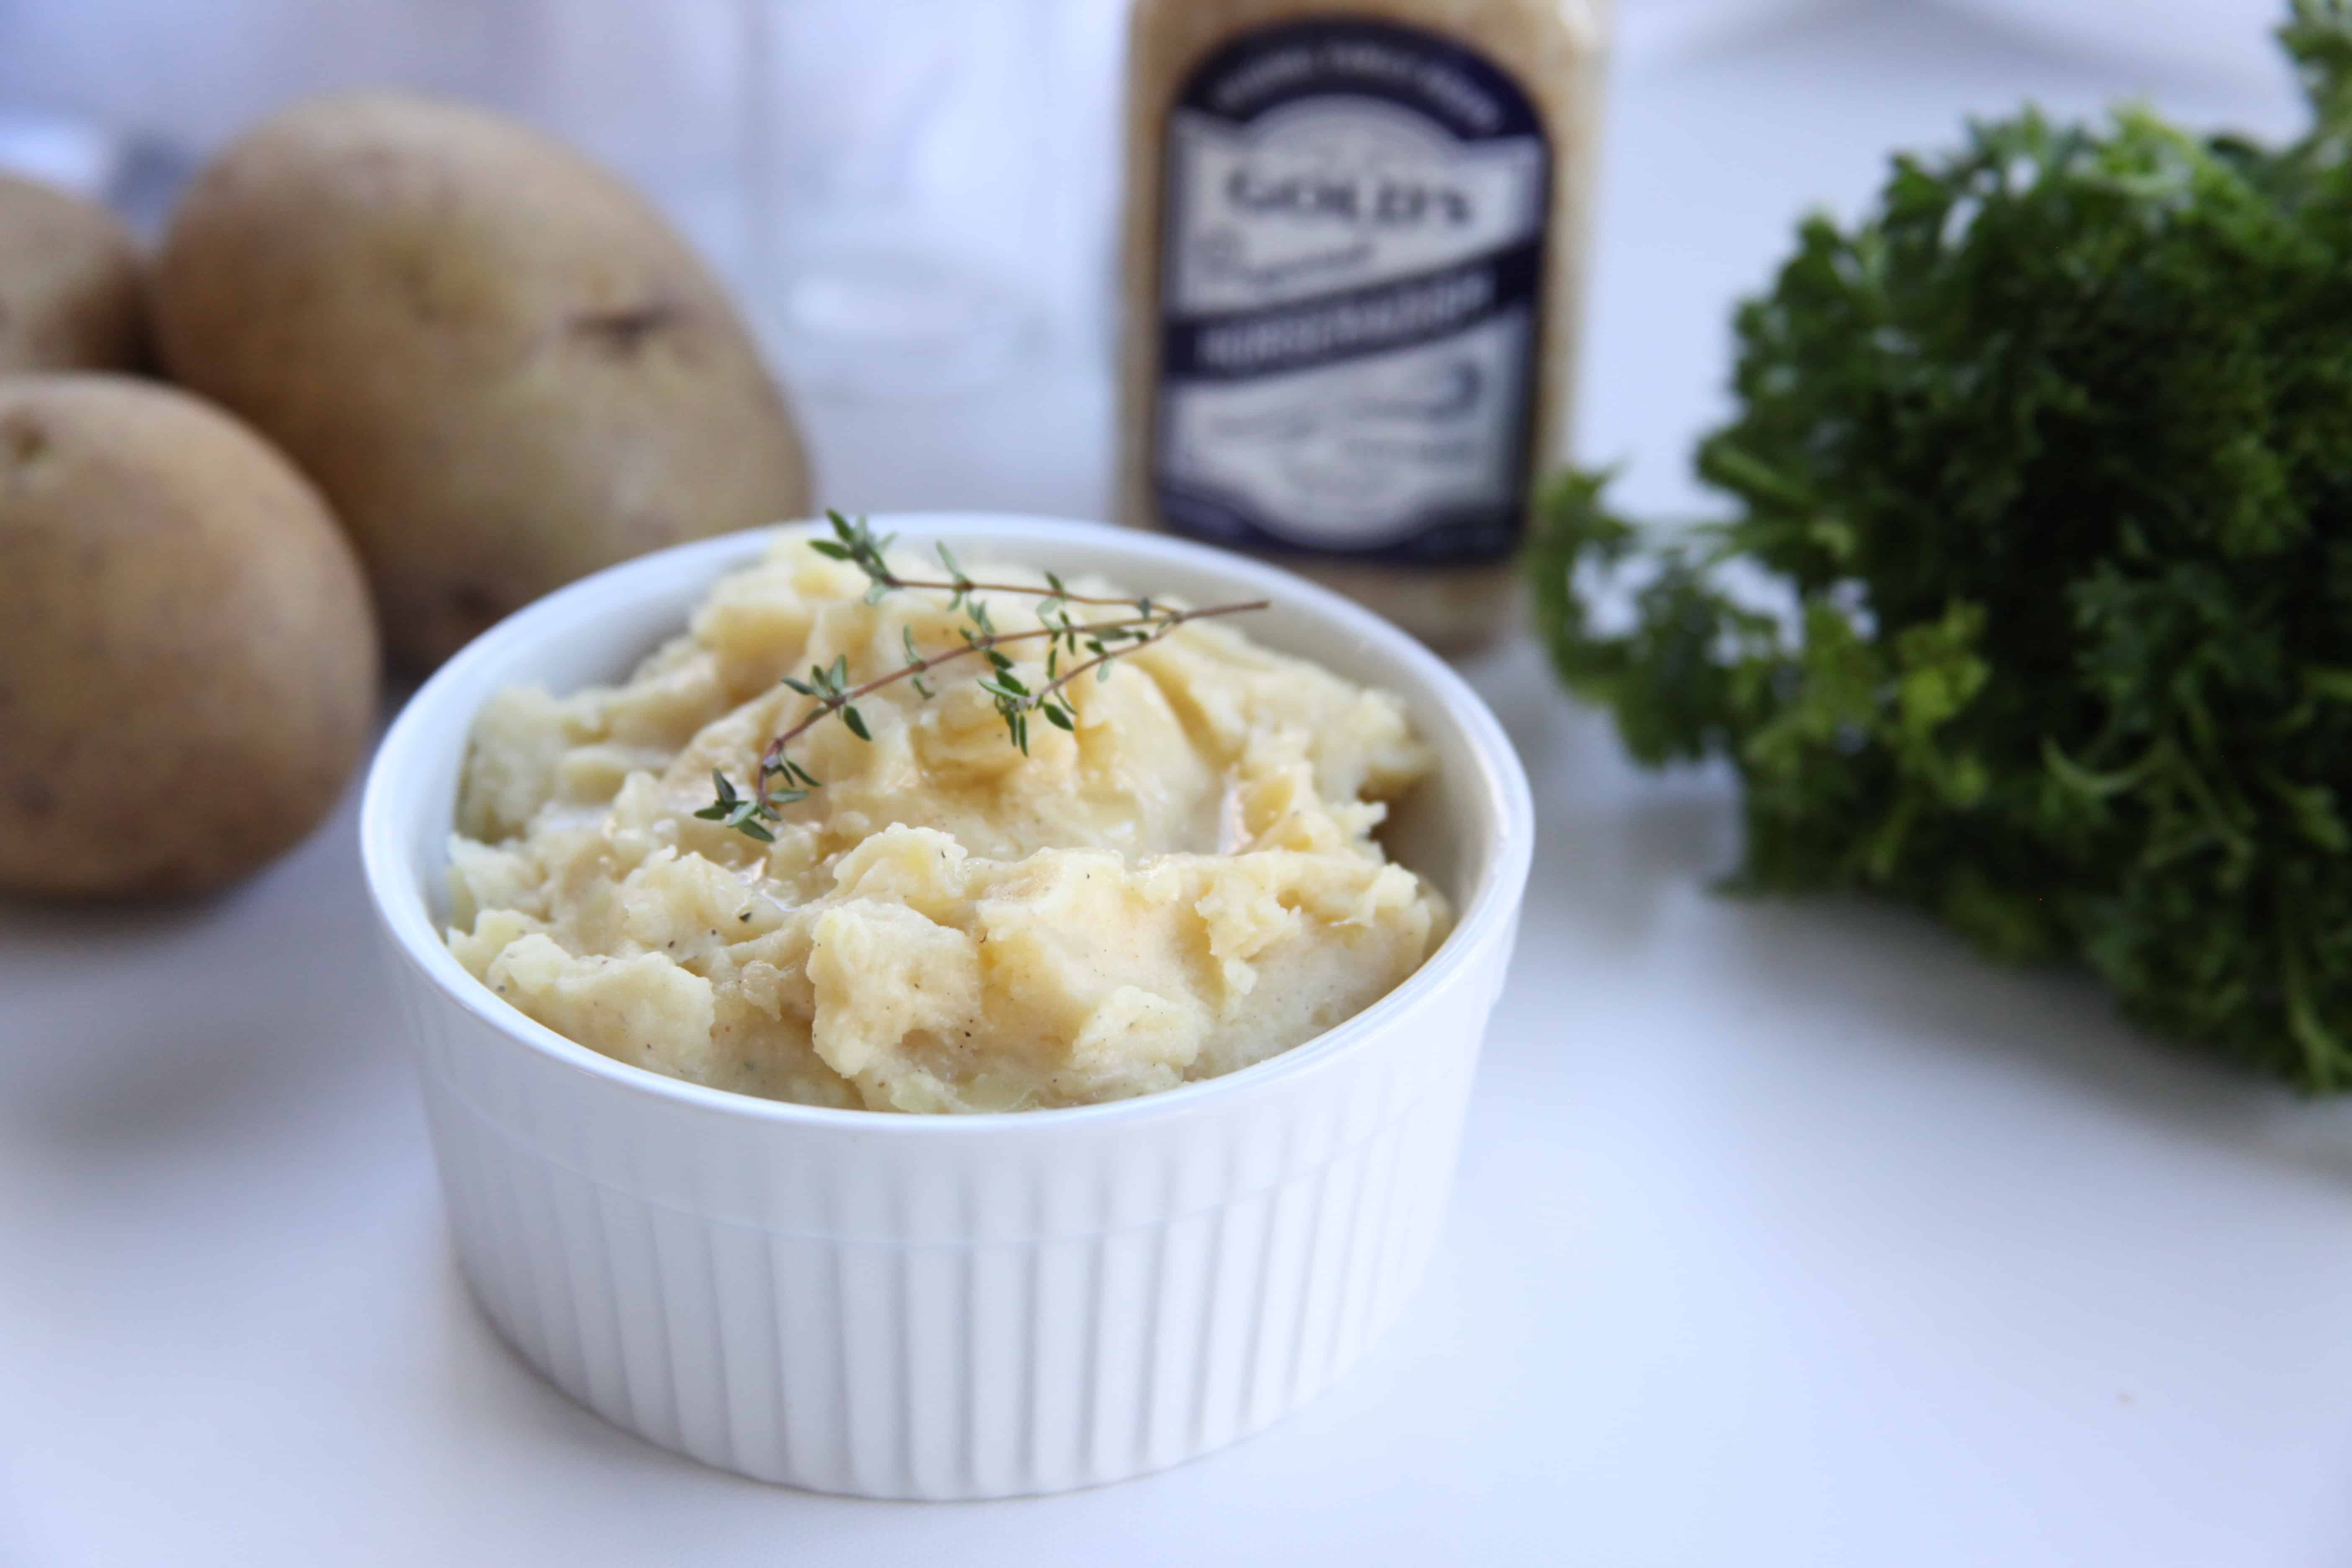 These creamy horseradish mashed potatoes add a great kick to a classic side dish using prepared horseradish. This recipe can be made on the stovetop or in your instant pot.